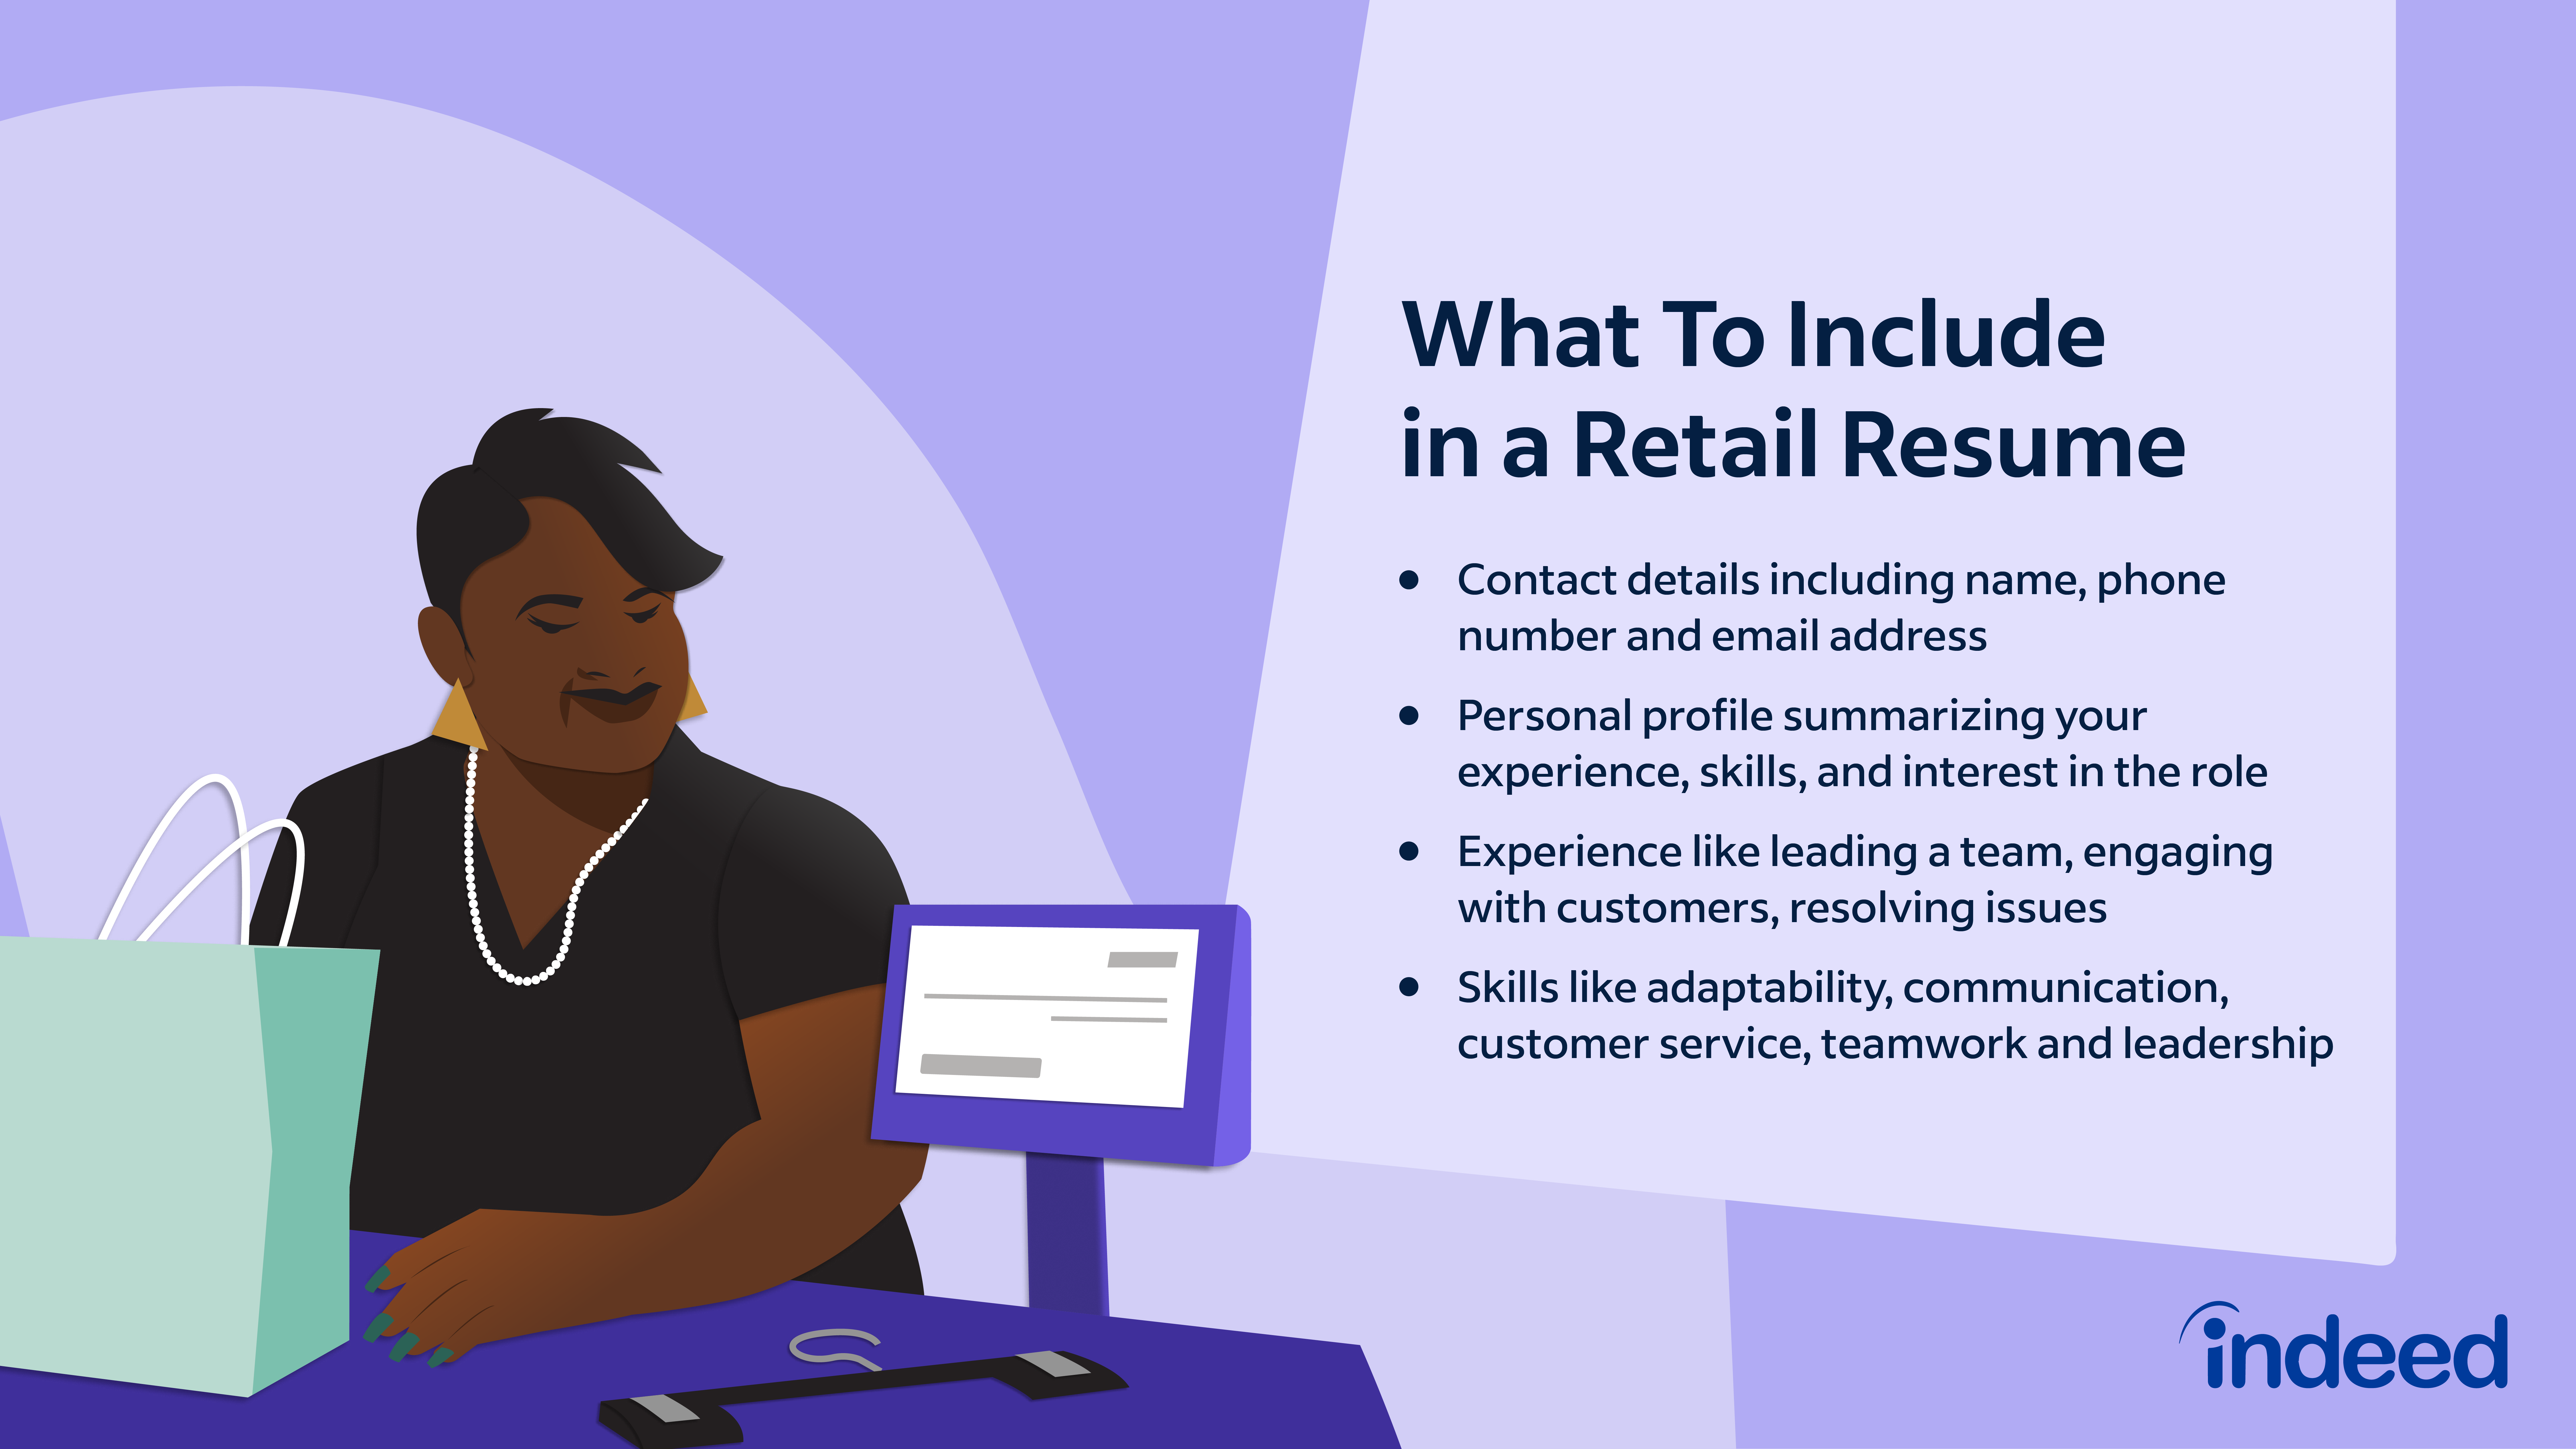 What is Retail Experience?